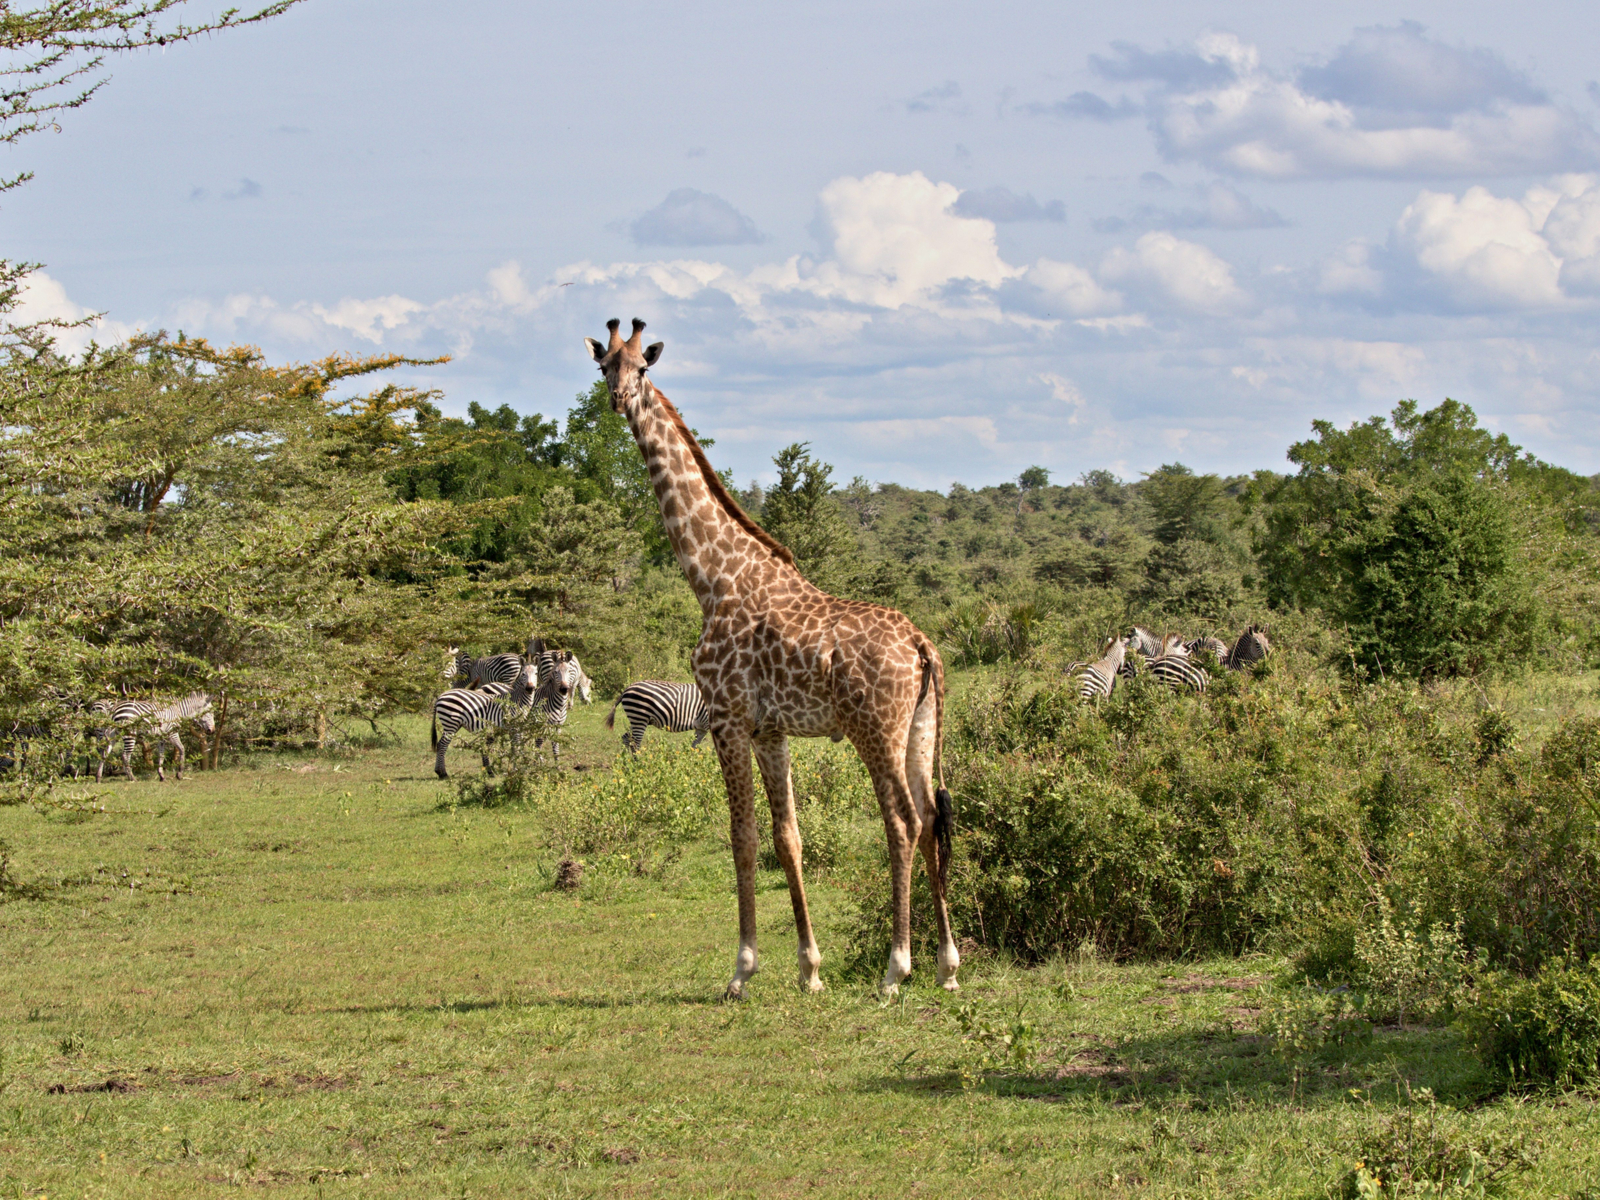 Giraffes and zebras at Nyerere National Park, location for one of the best safaris in Africa